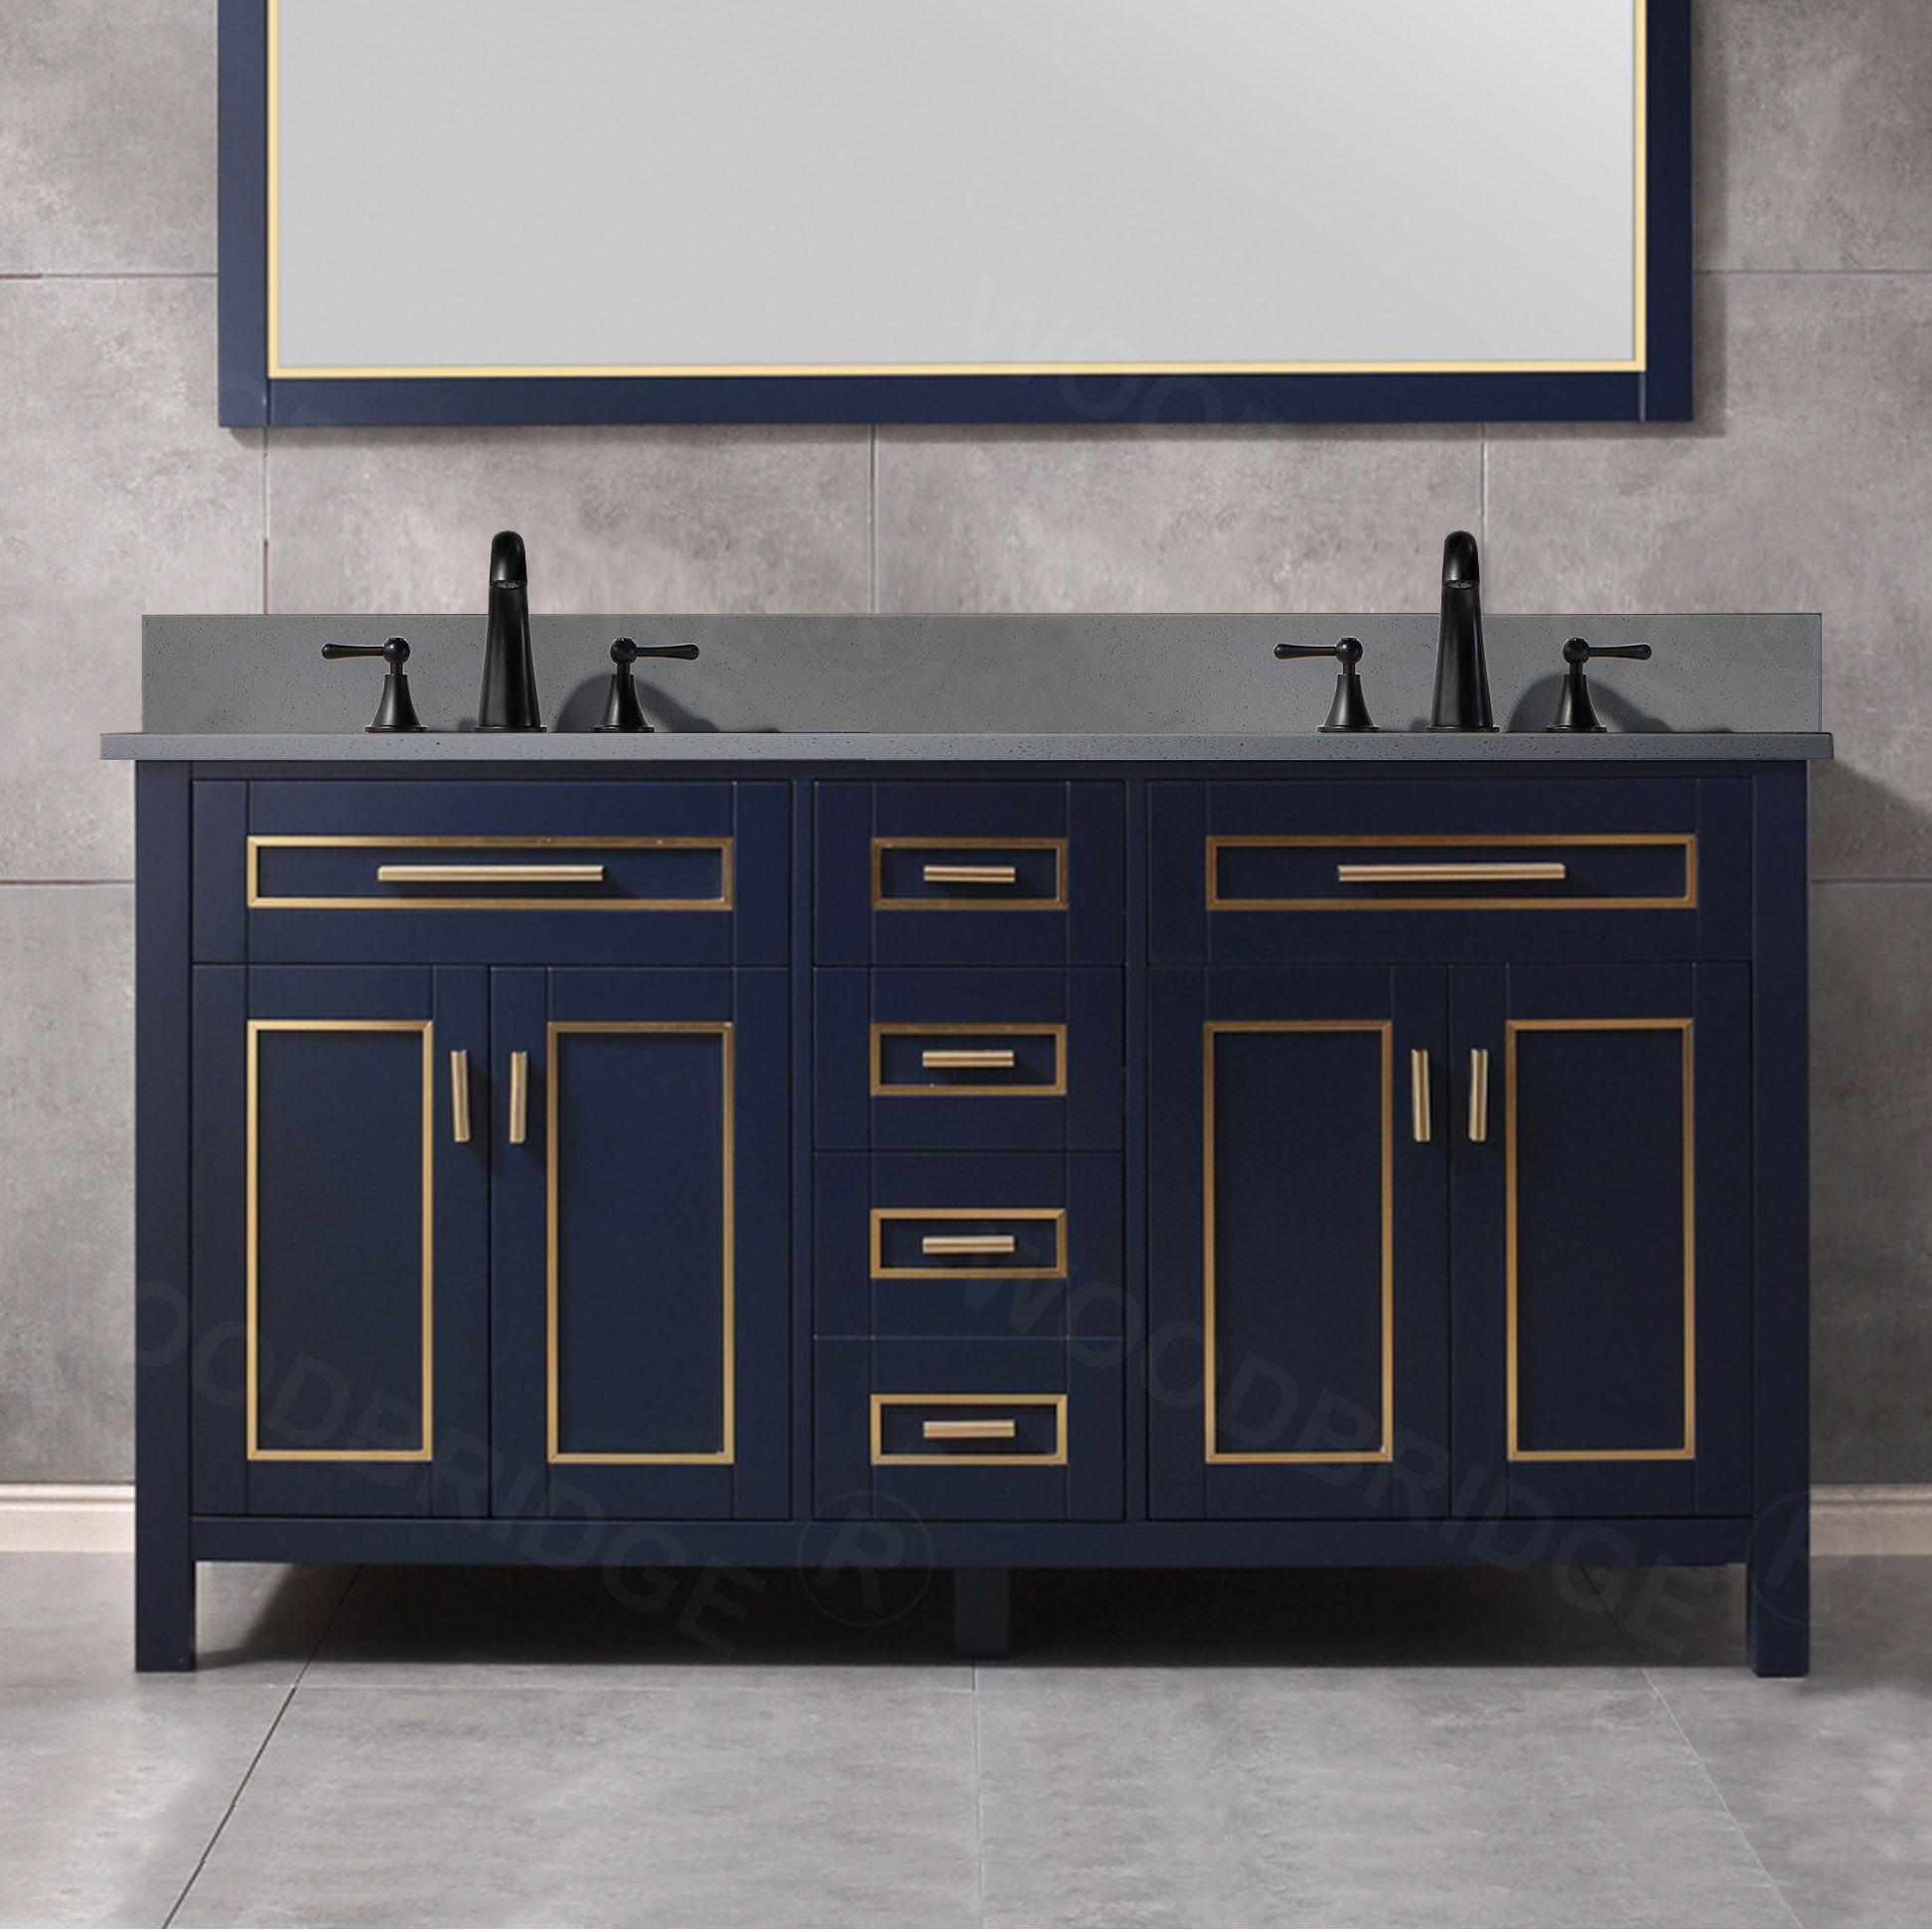 WOODBRIDGE Milan  61” Floor Mounted Single Basin Vanity Set with Solid Wood Cabinet in Navy Blue and Engineered stone composite Vanity Top in Dark Gray with Pre-installed Undermount Rectangle Bathroom Sink in White and Pre-Drilled 3-Hole for 4” Centerset